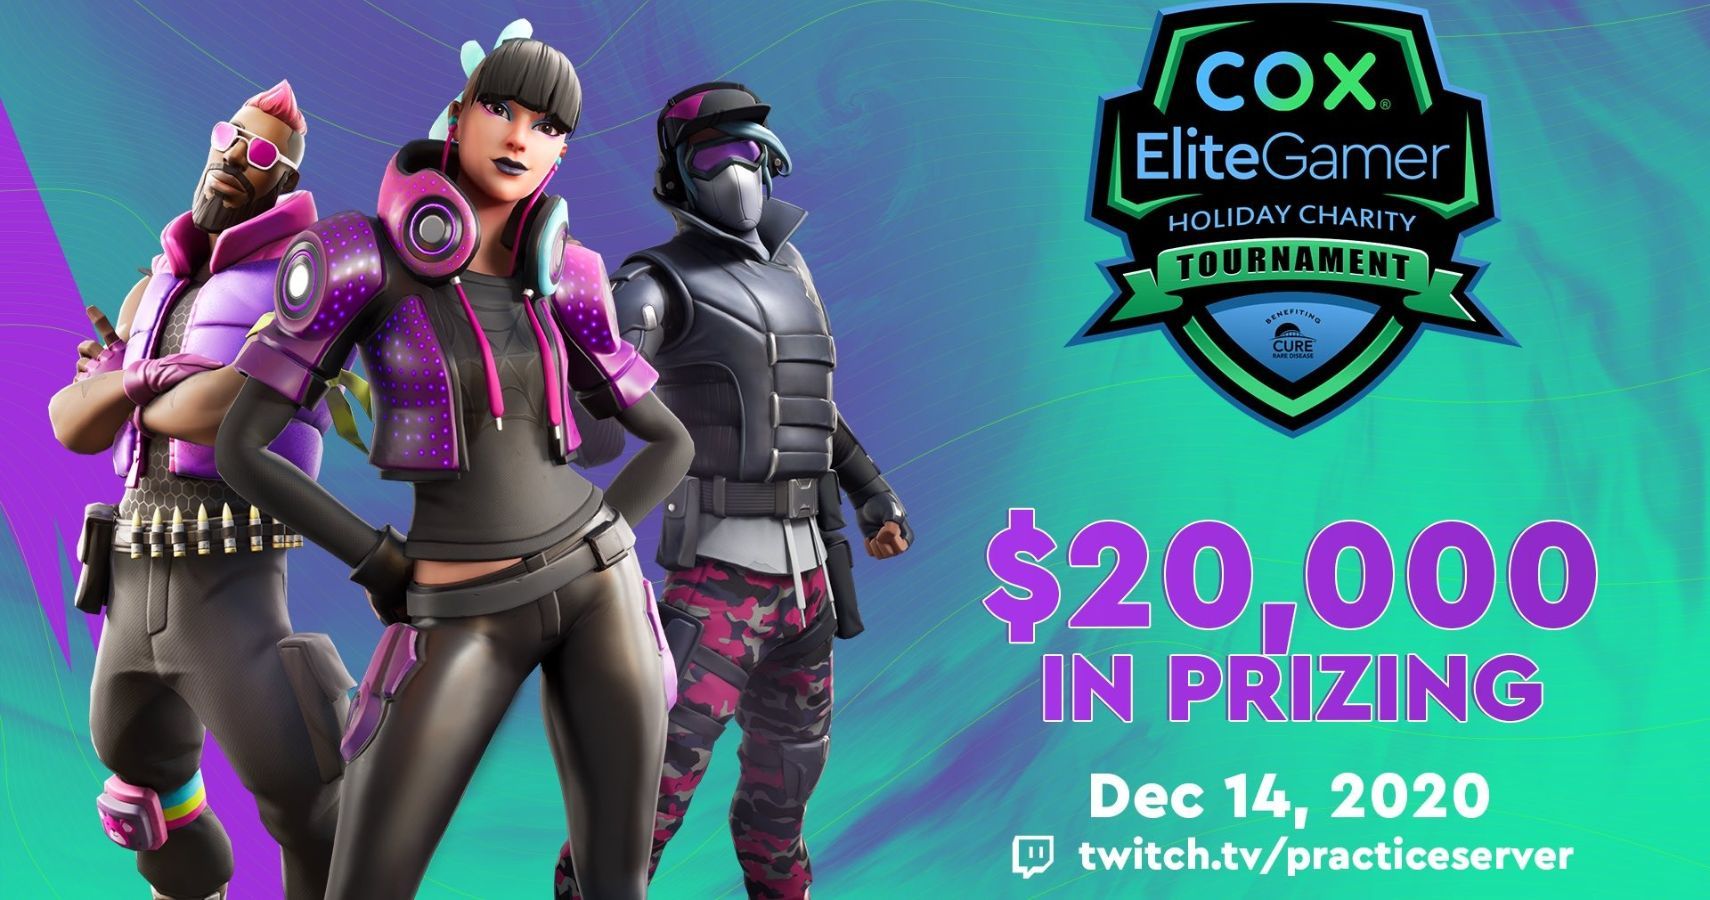 Upcoming Fortnite Tournament To Benefit Charity For Rare Diseases